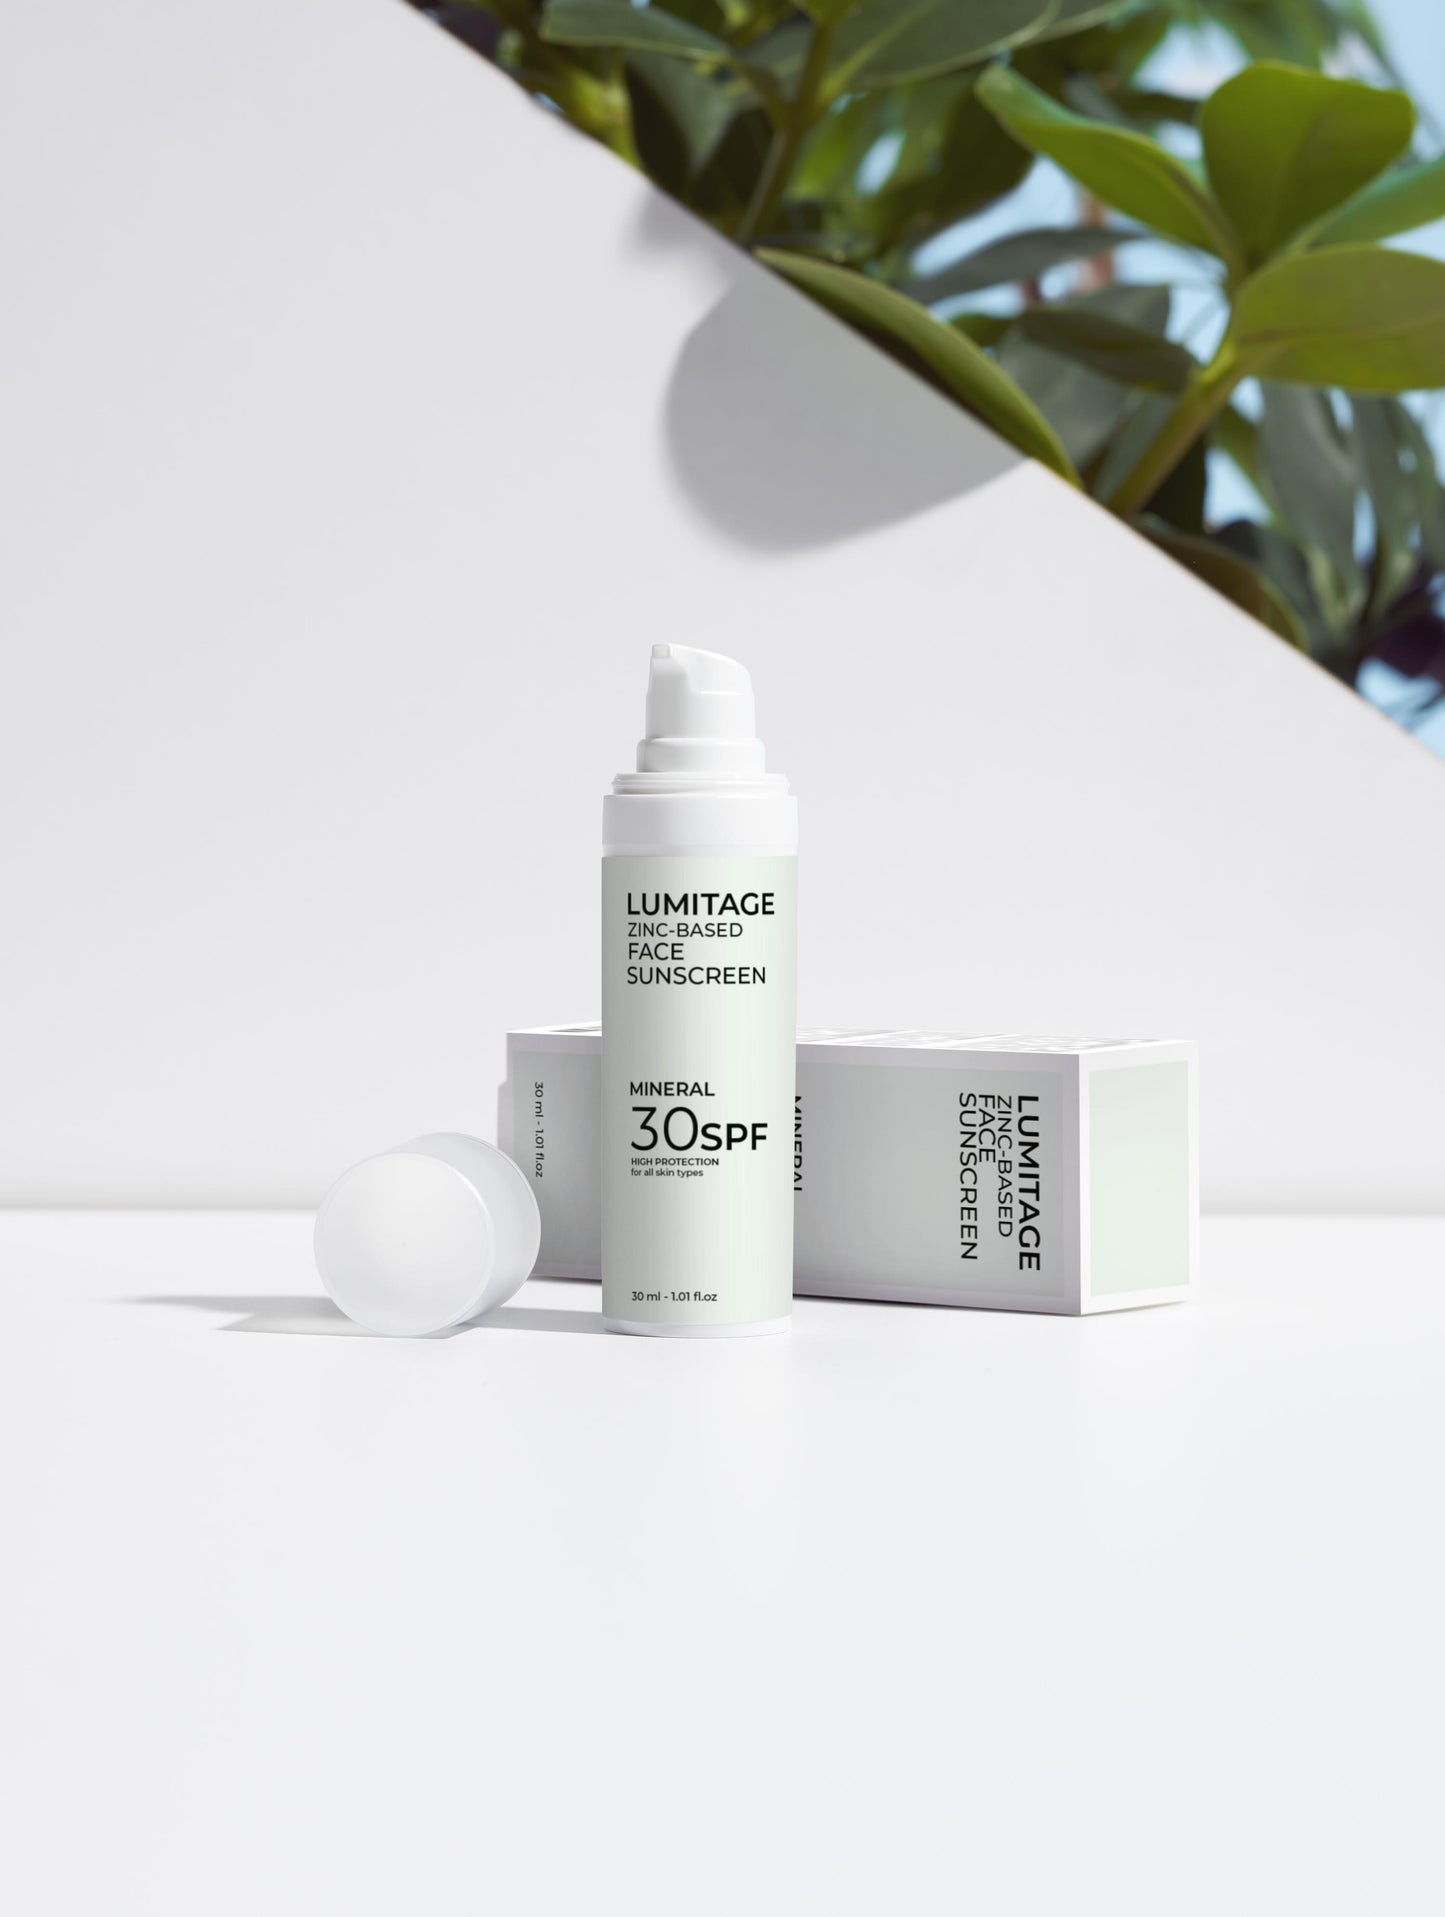 Lumitage sunscreen - the zinc-based organic sunscreen for daily facial use in a white studio environment..